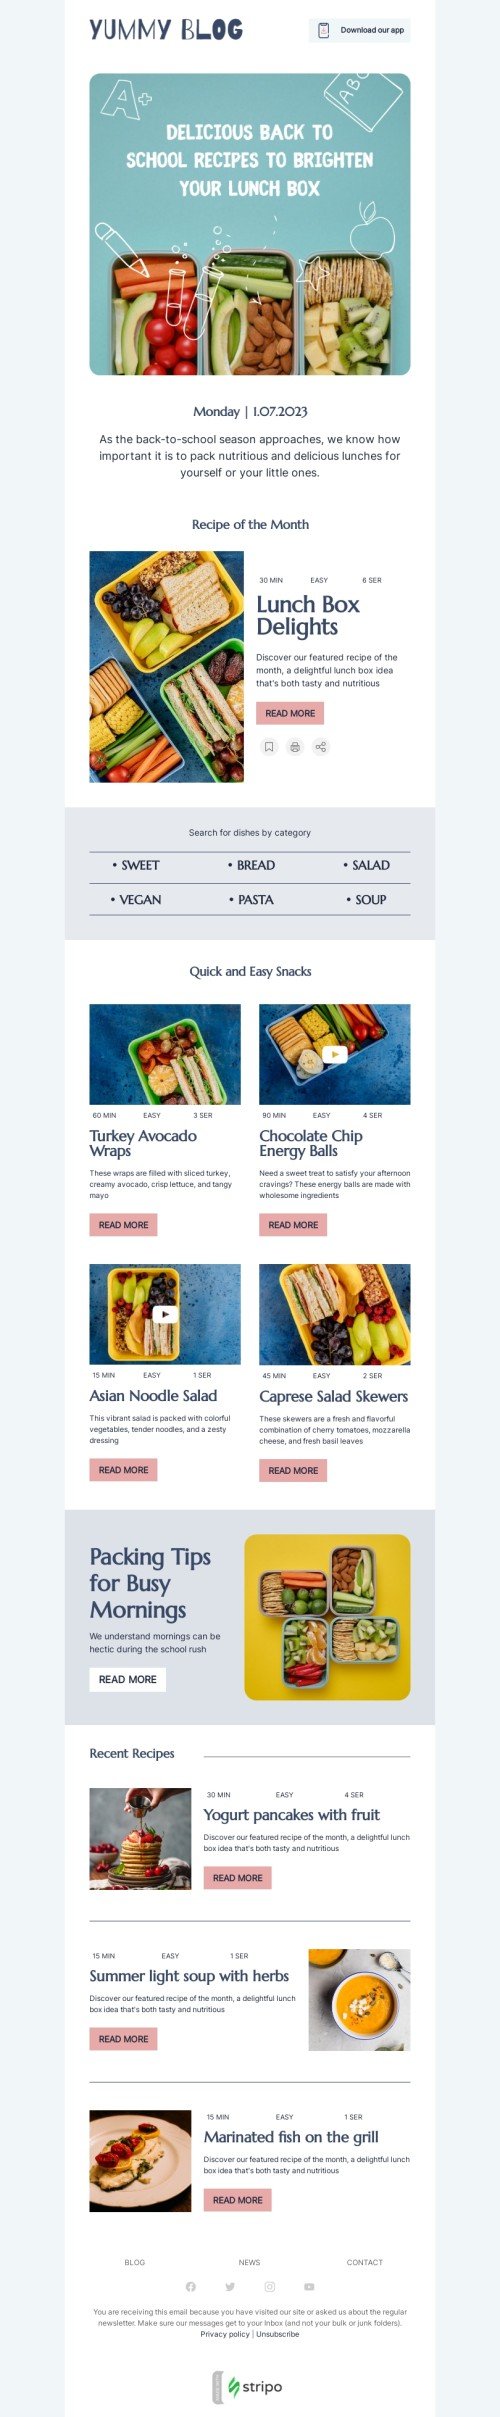 Back to school email template "Brighten your lunch box" for publications & blogging industry mobile view